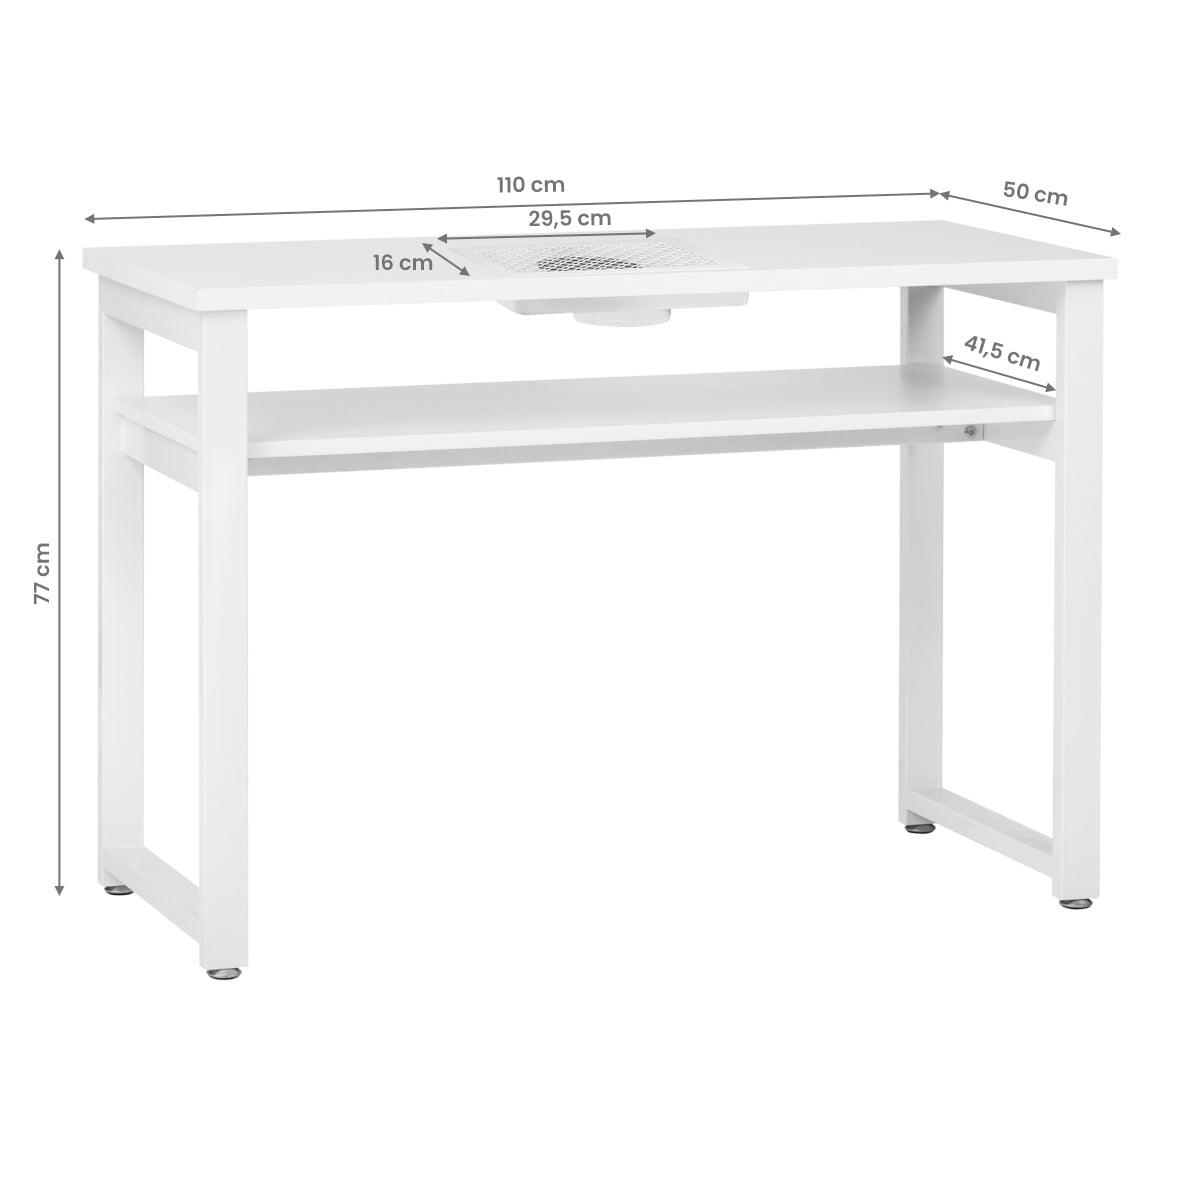 COSMETIC DESK 23W WHITE WITH MOMO S41 LUX ABSORBER